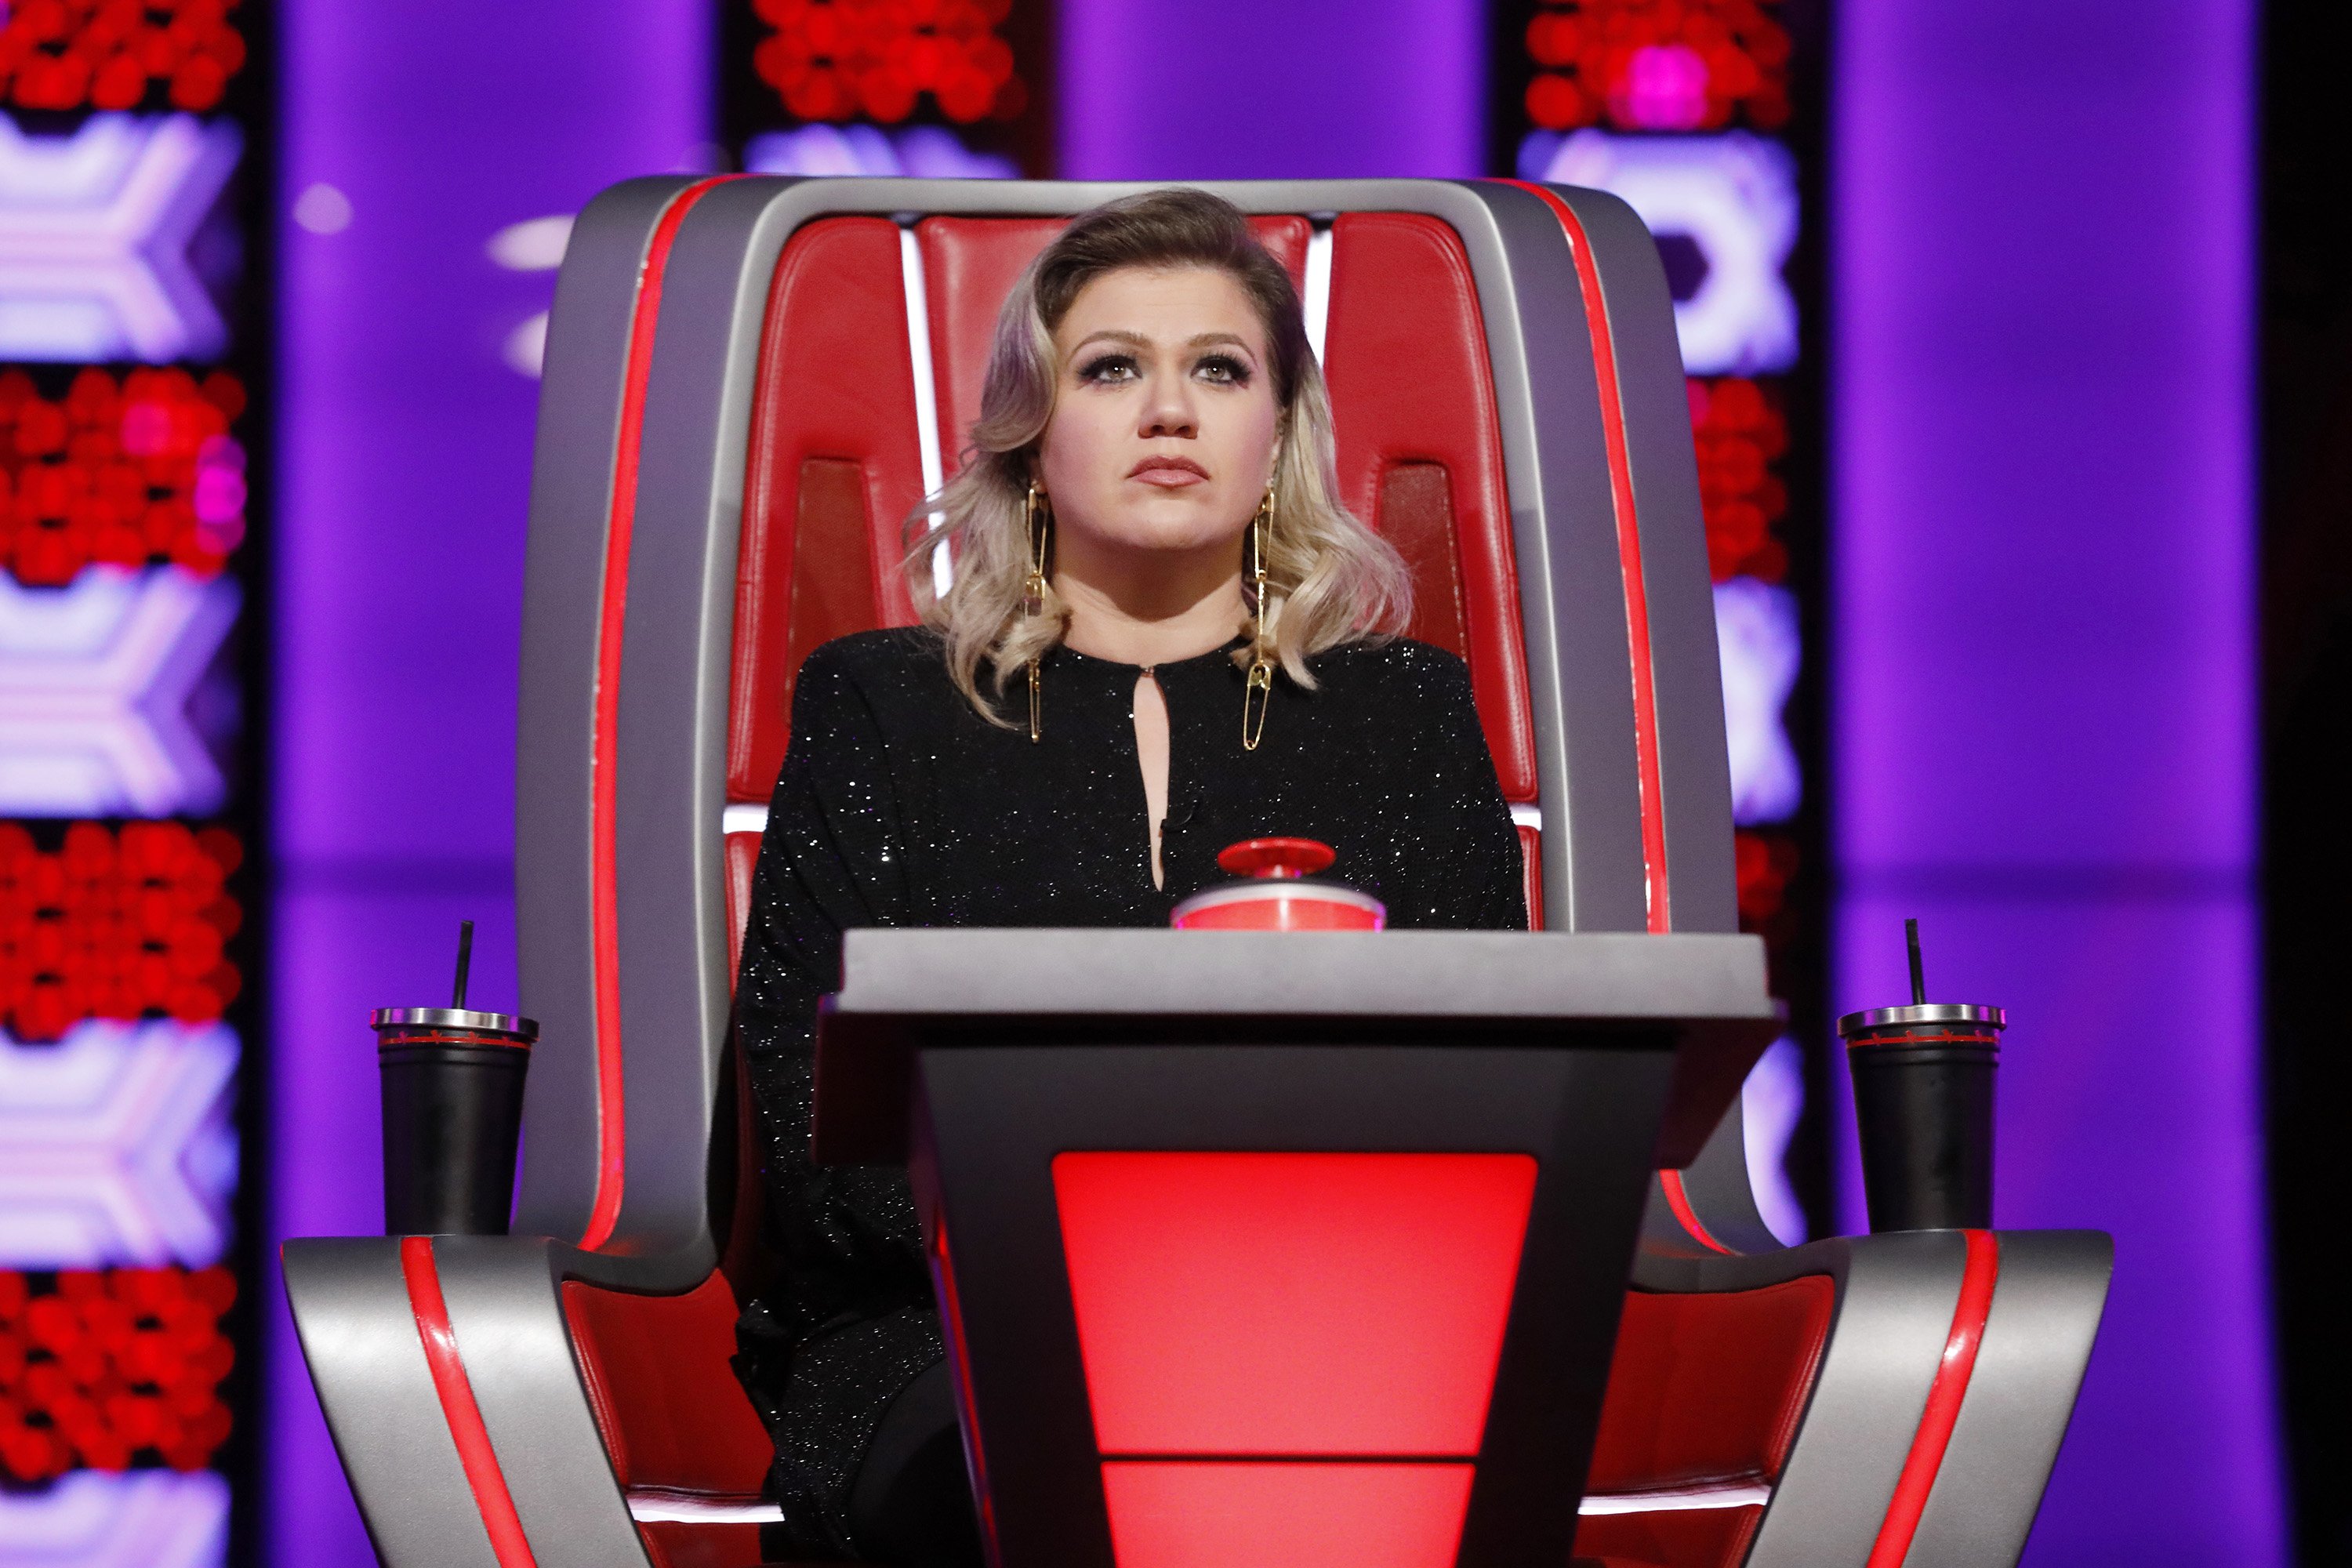 Kelly Clarkson during the "The Voice" Blind Auditions | Photo: Getty Images